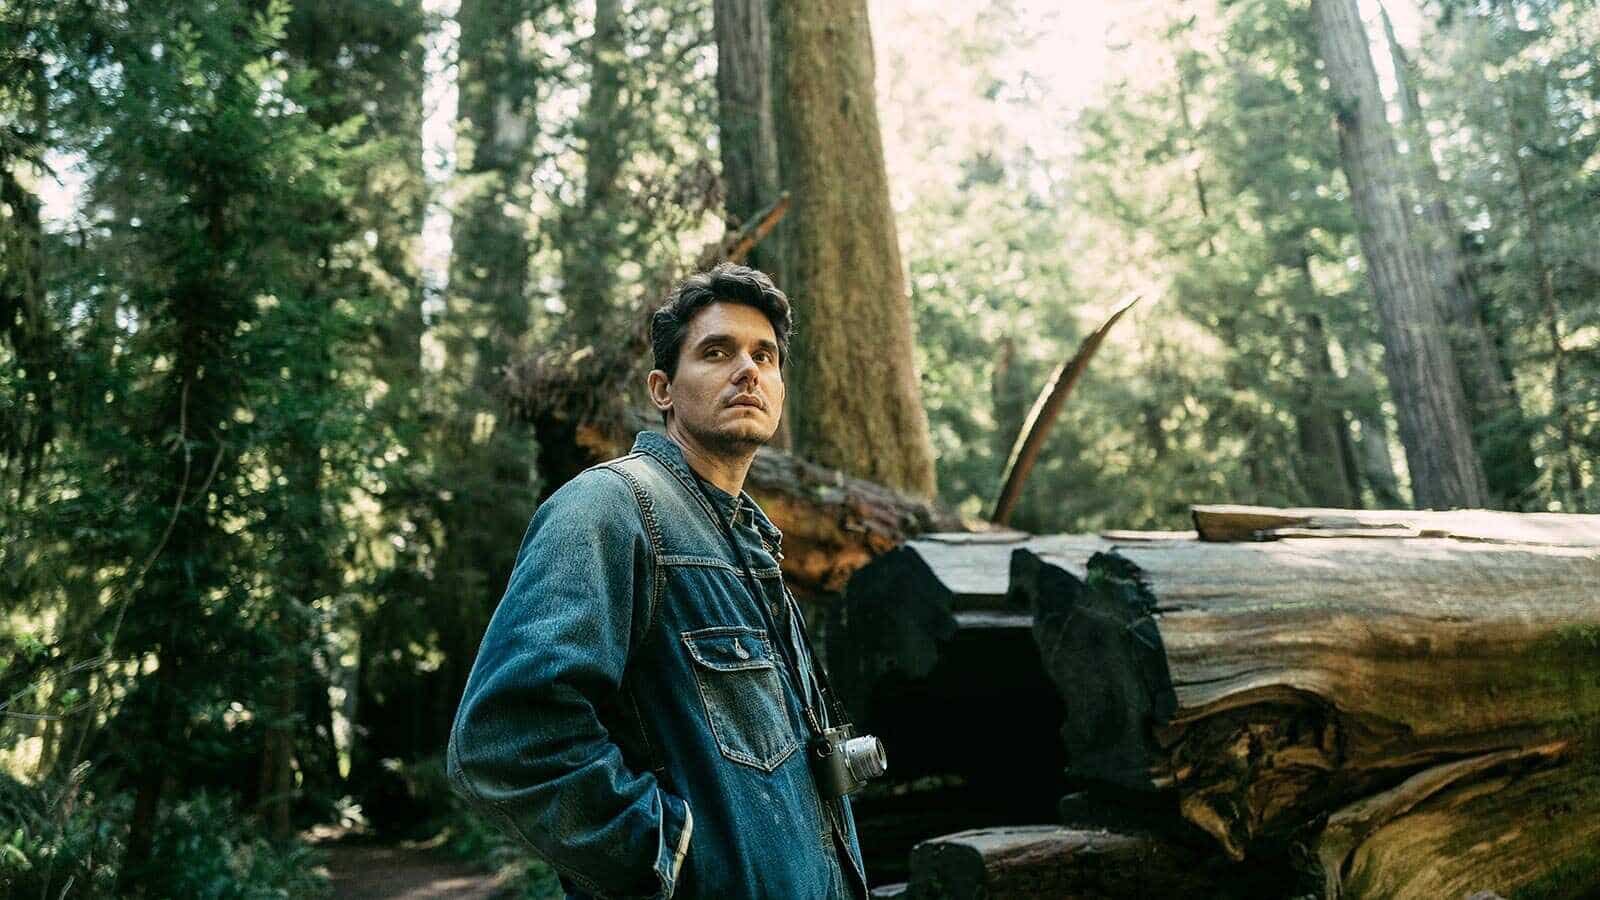 John Mayer Land Rover Defender in the forest